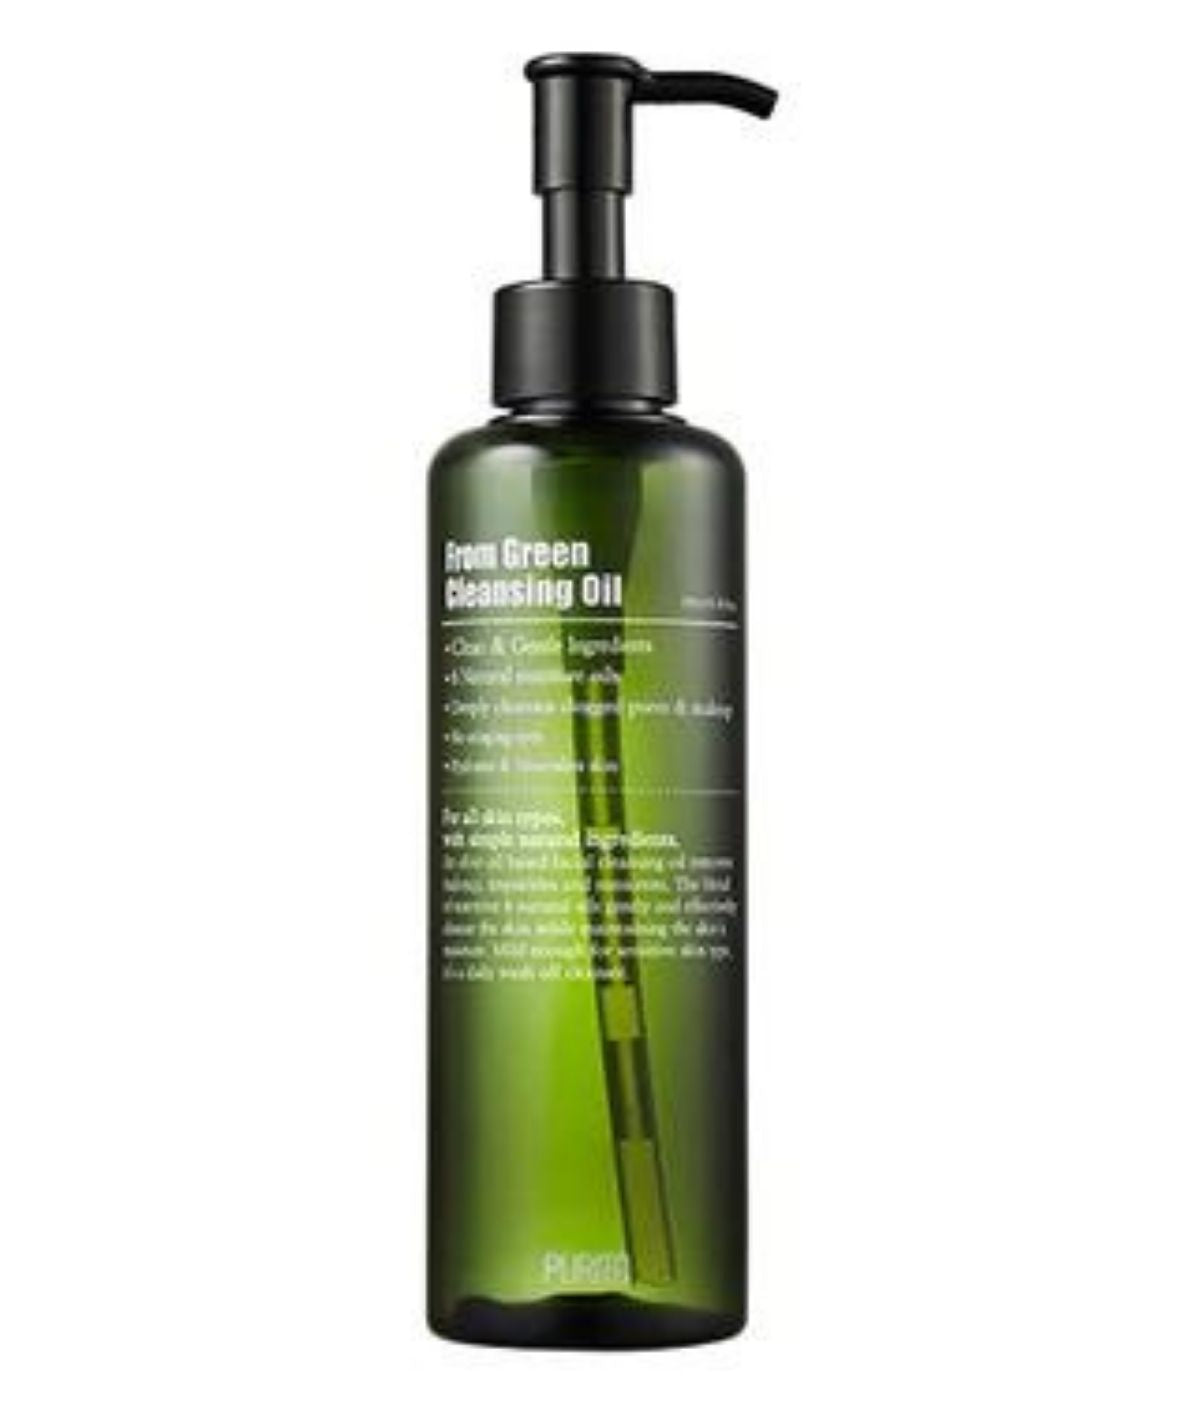 FROM GREEN CLEANSING OIL